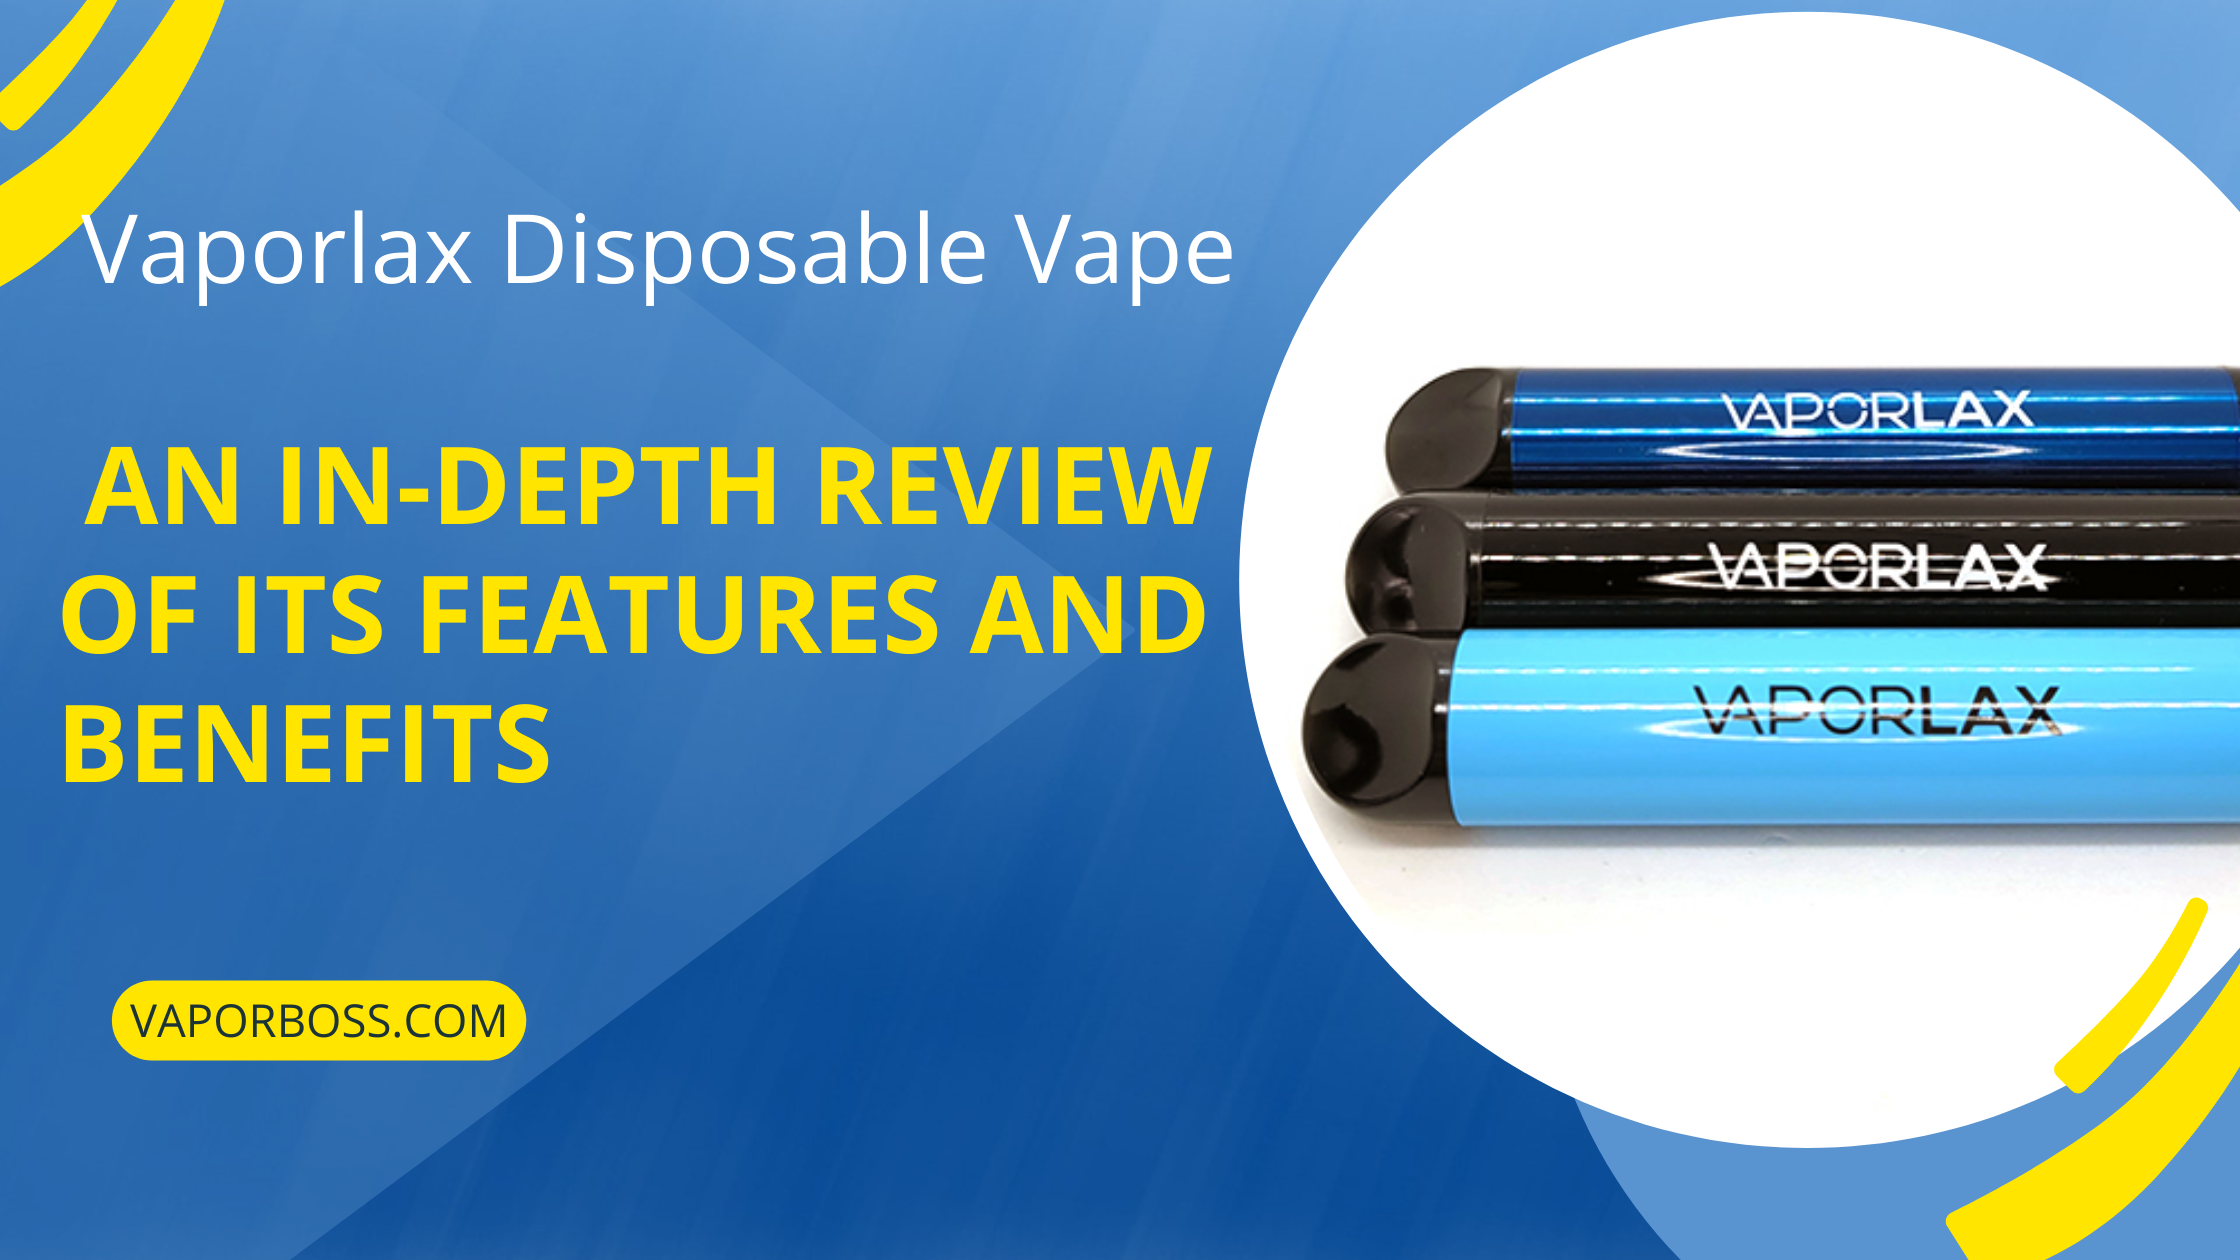 The Vaporlax Disposable Vape - An In-Depth Review of Its Features and Benefits